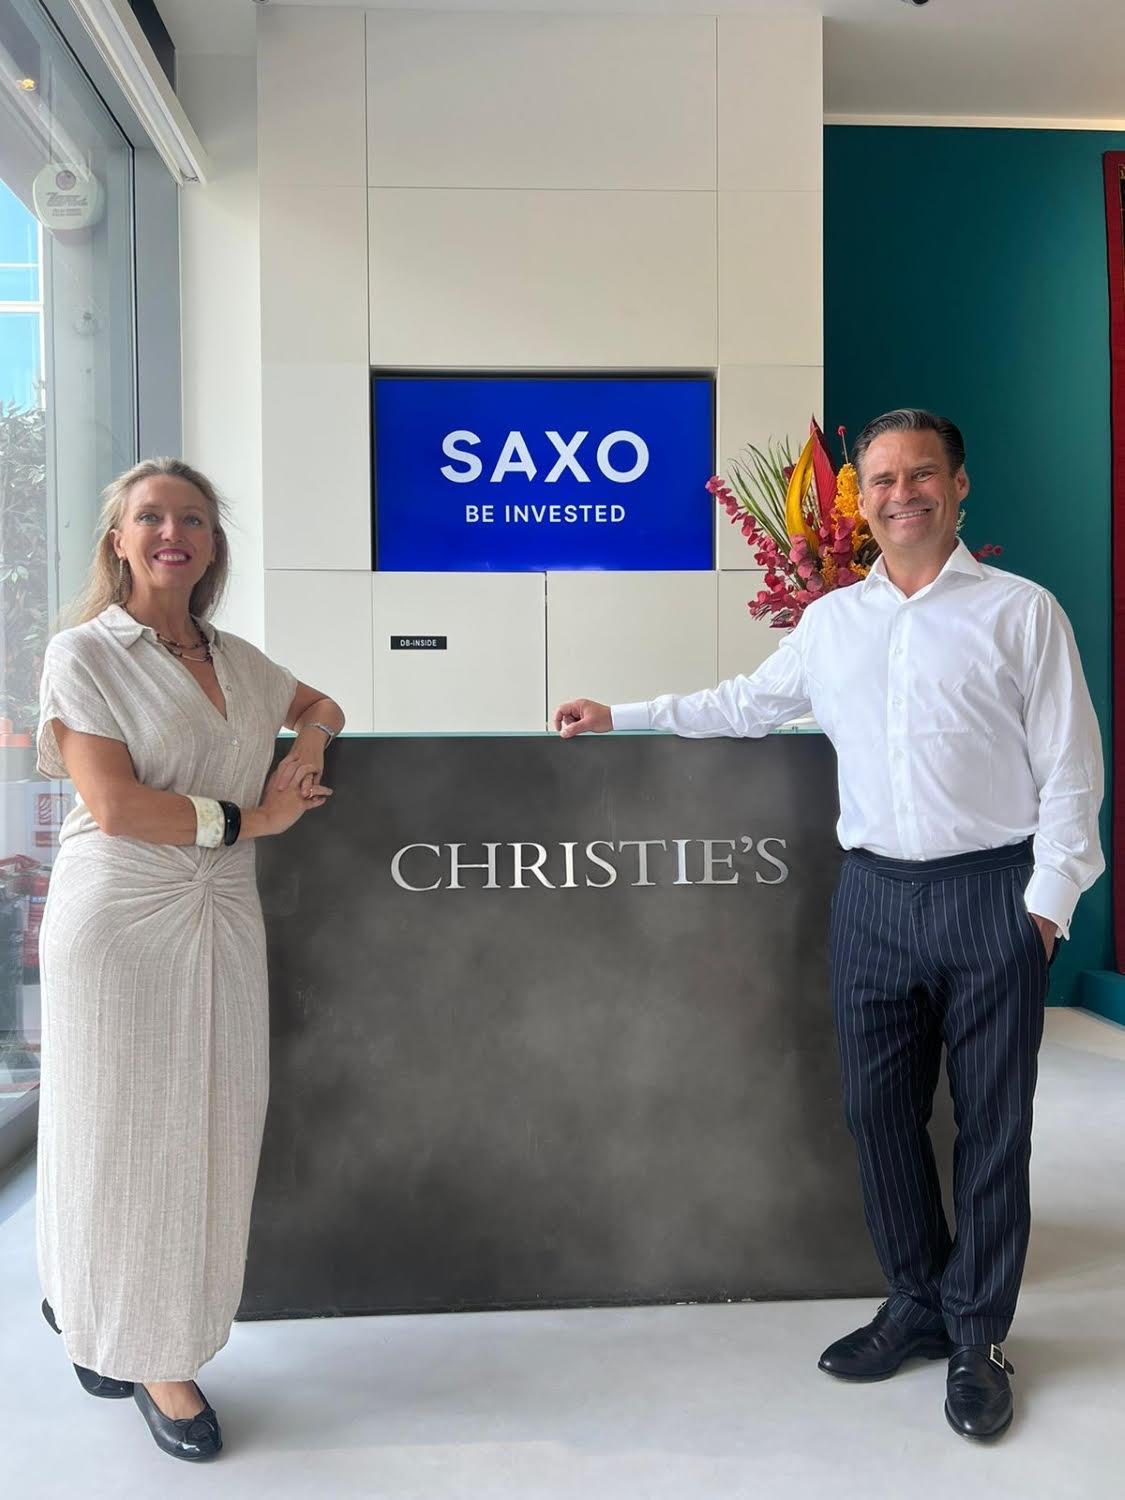 Saxo Bank Partners With Christie's Auction House To Enhance Art Investment Awareness